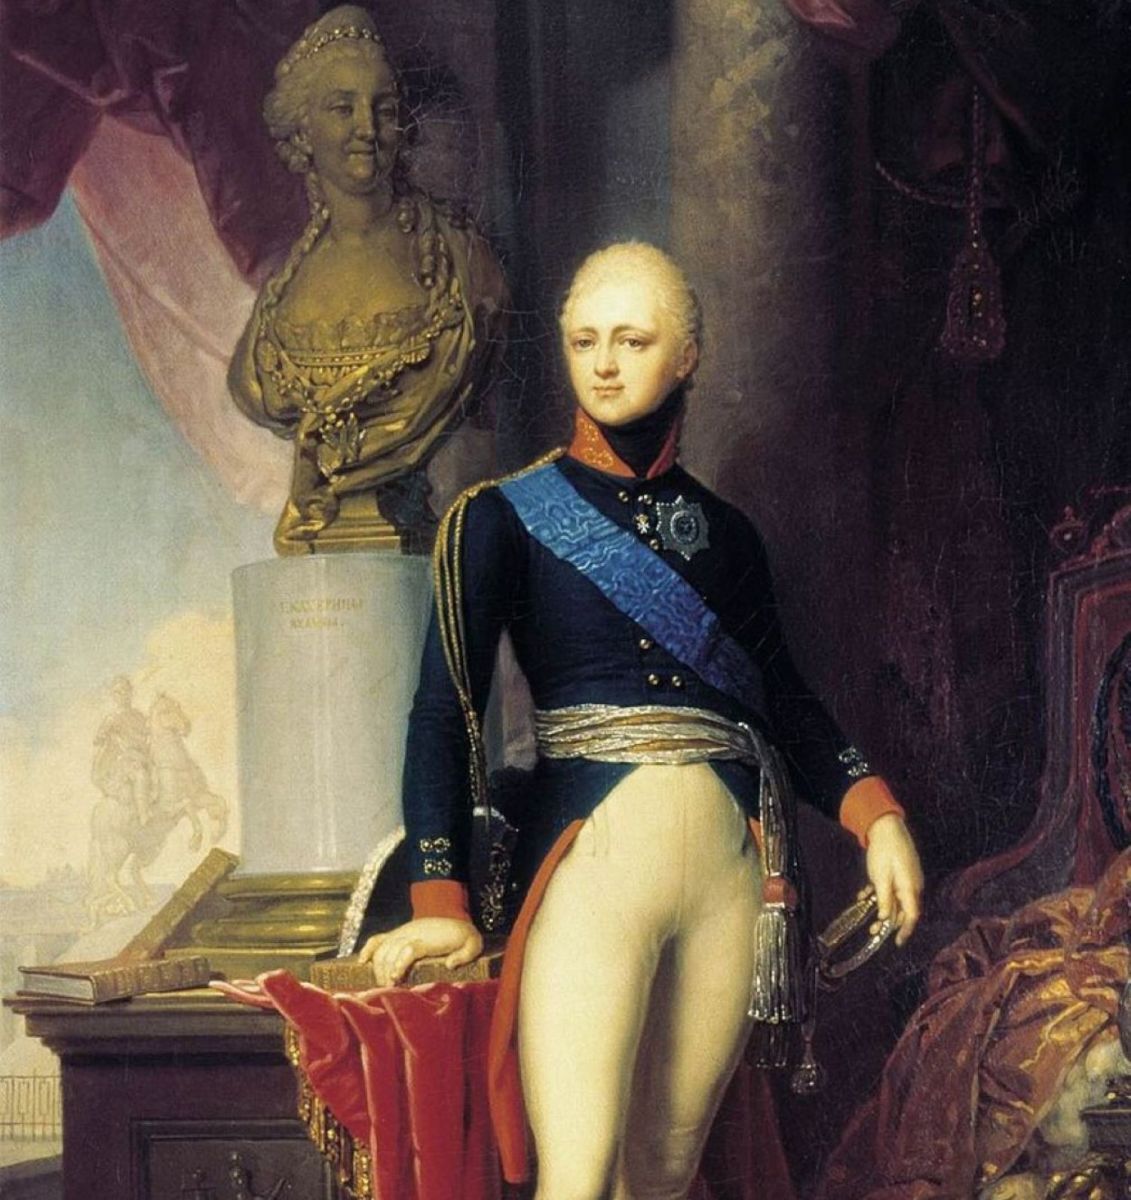 Alexander I, Tsar of All Russia succeeded his father in 1801. He was aware of the coup to overthrow Paul I.